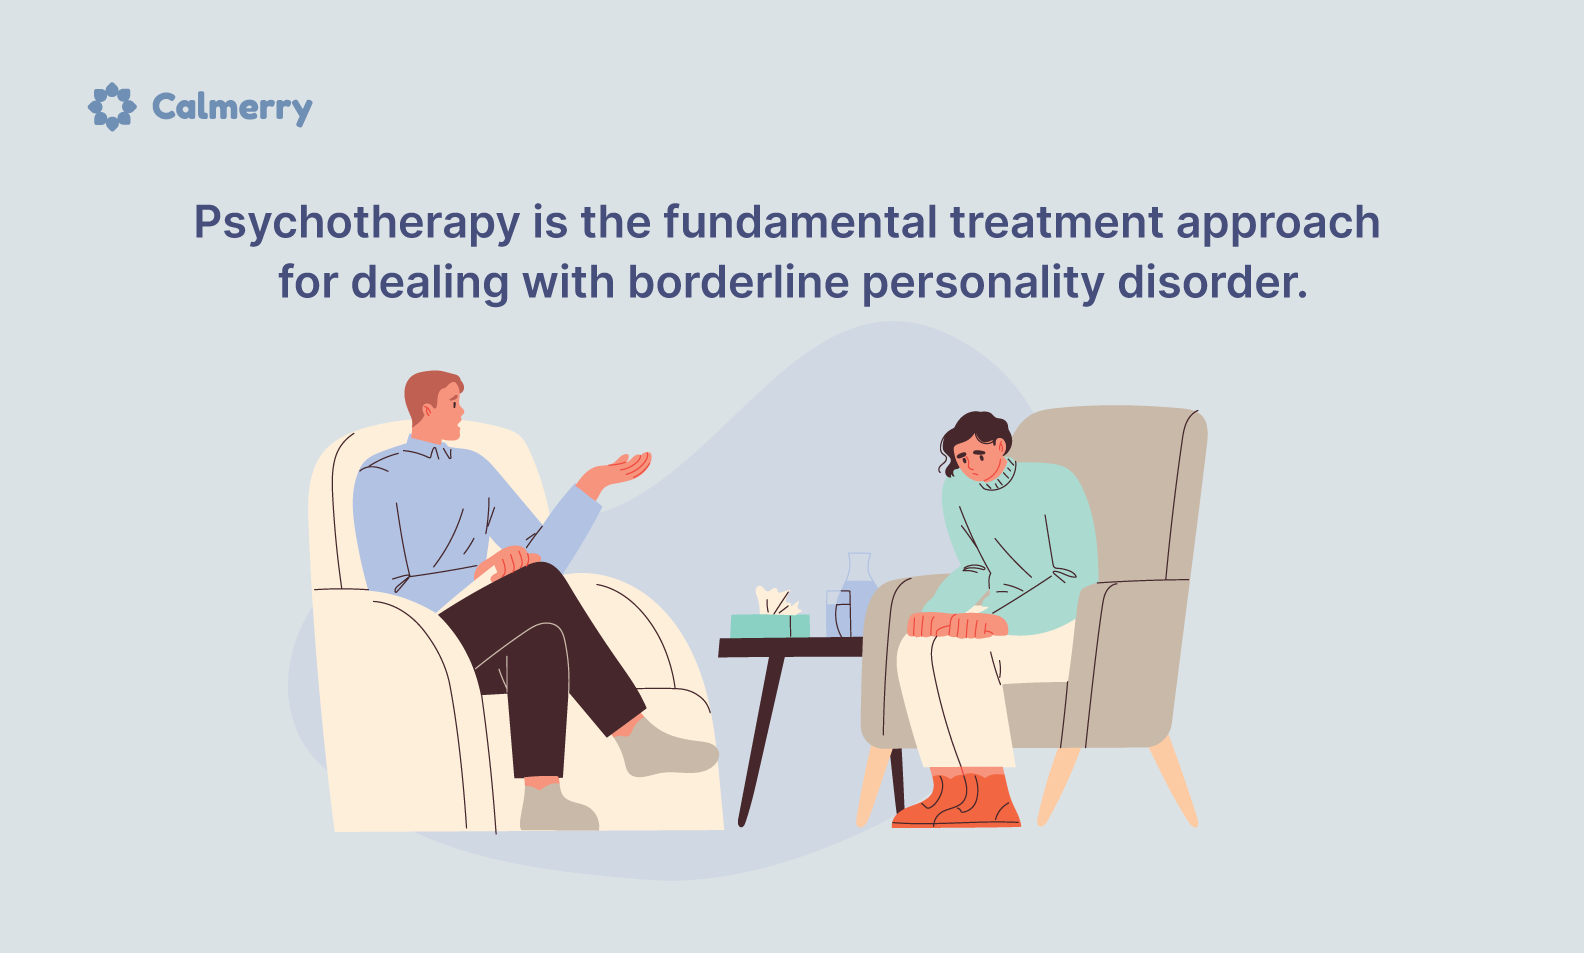 Psychotherapy for borderline personality disorder